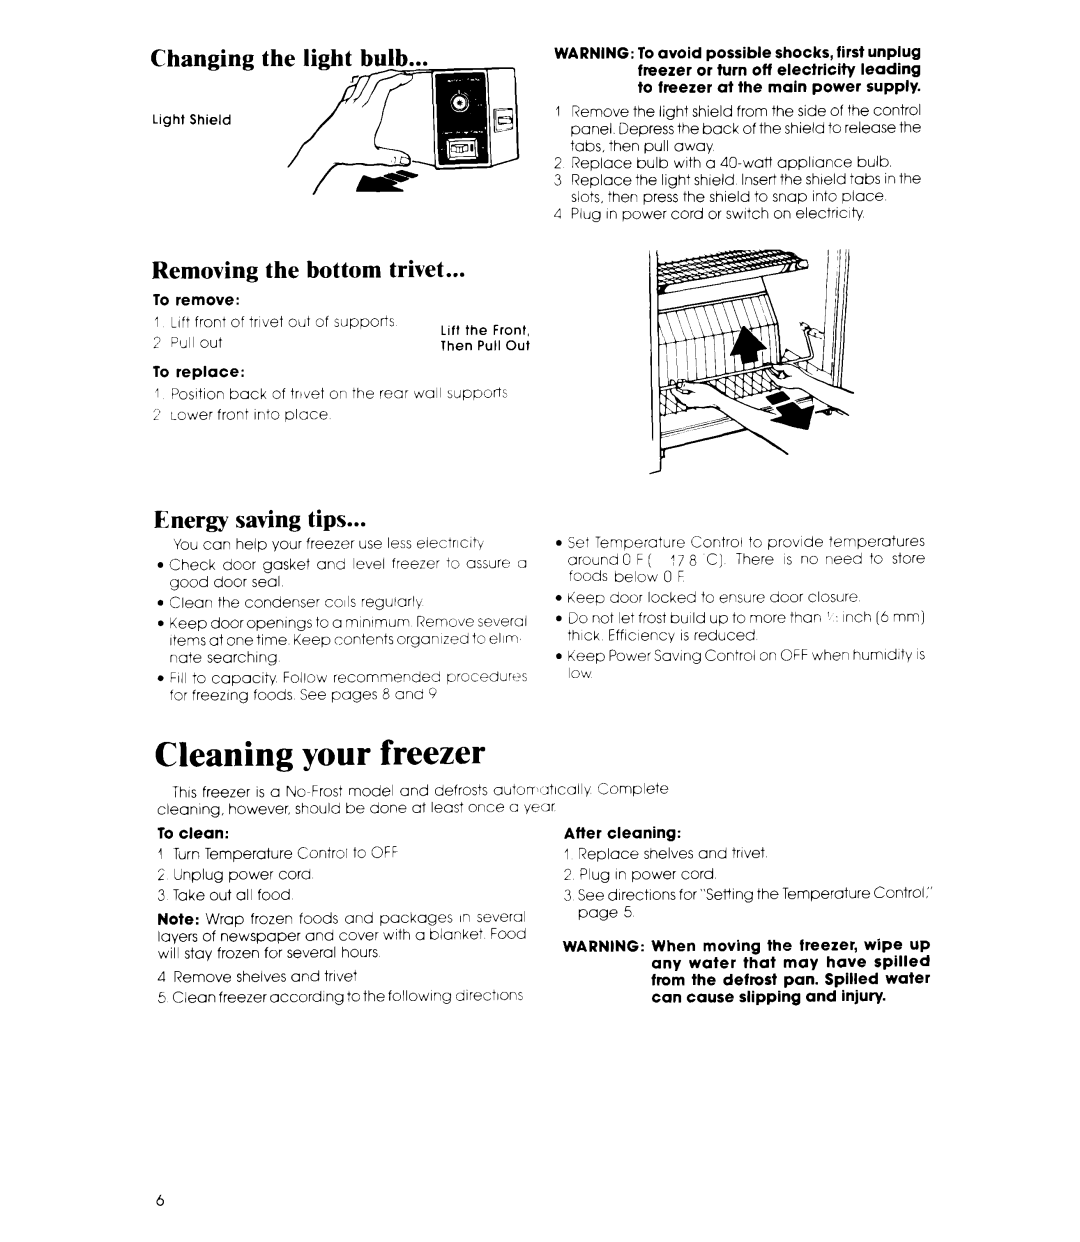 Whirlpool EV130N manual Cleaning your freezer, Changing the light bulb, Removing the bottom trivet, Energy saving tips 